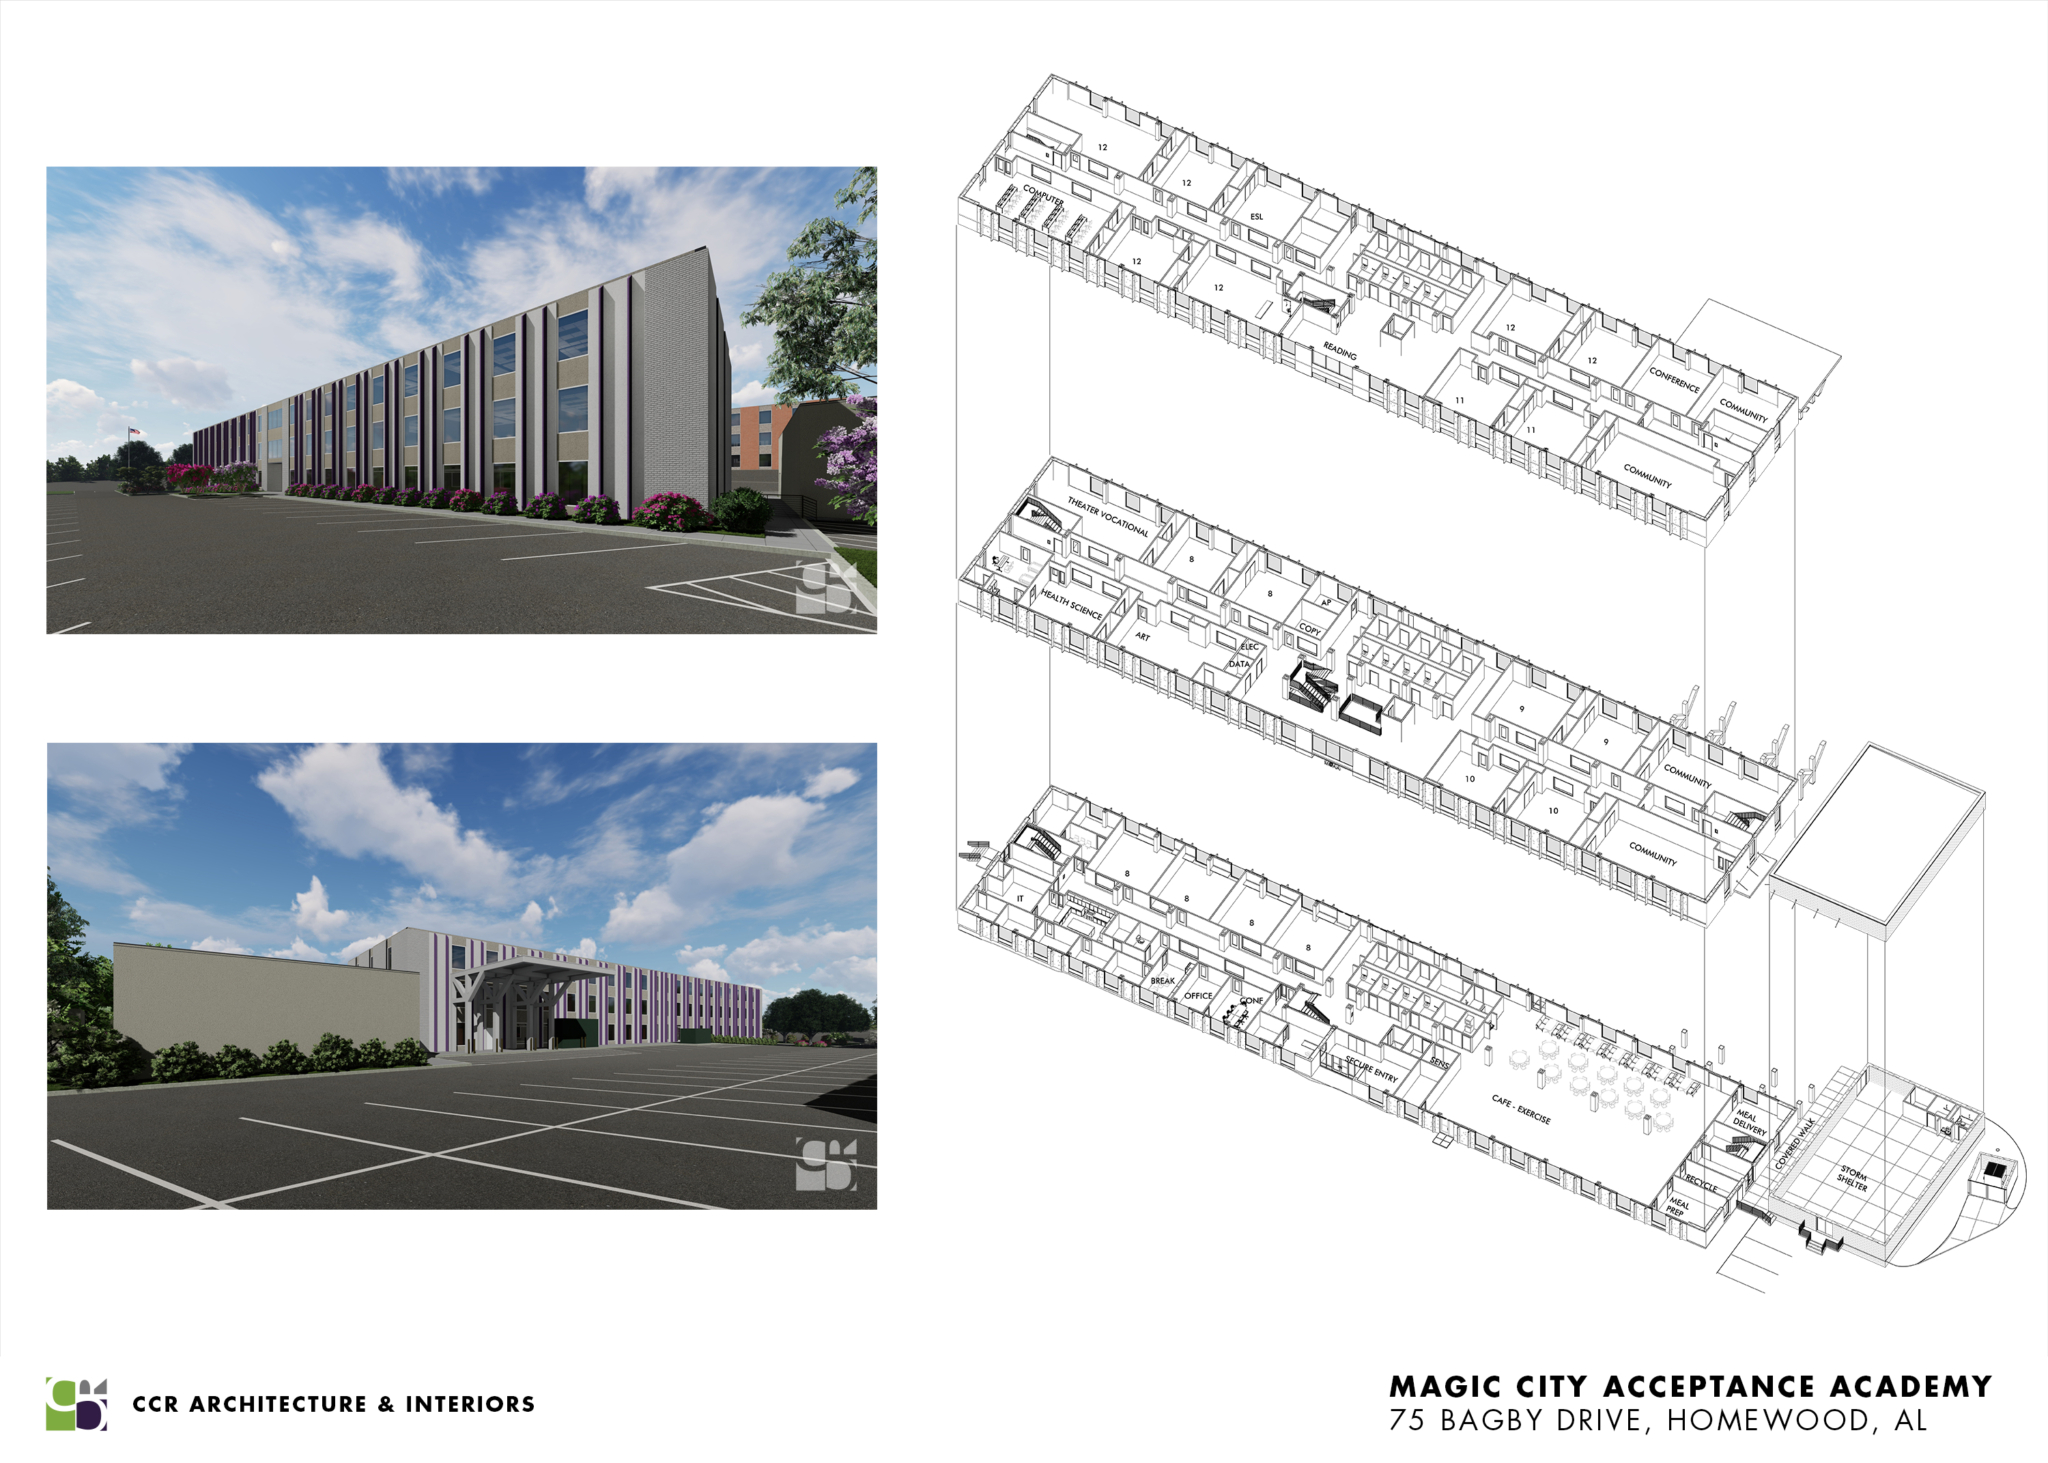 Board3 v2 Homewood's Magic City Acceptance Academy breaks ground and barriers